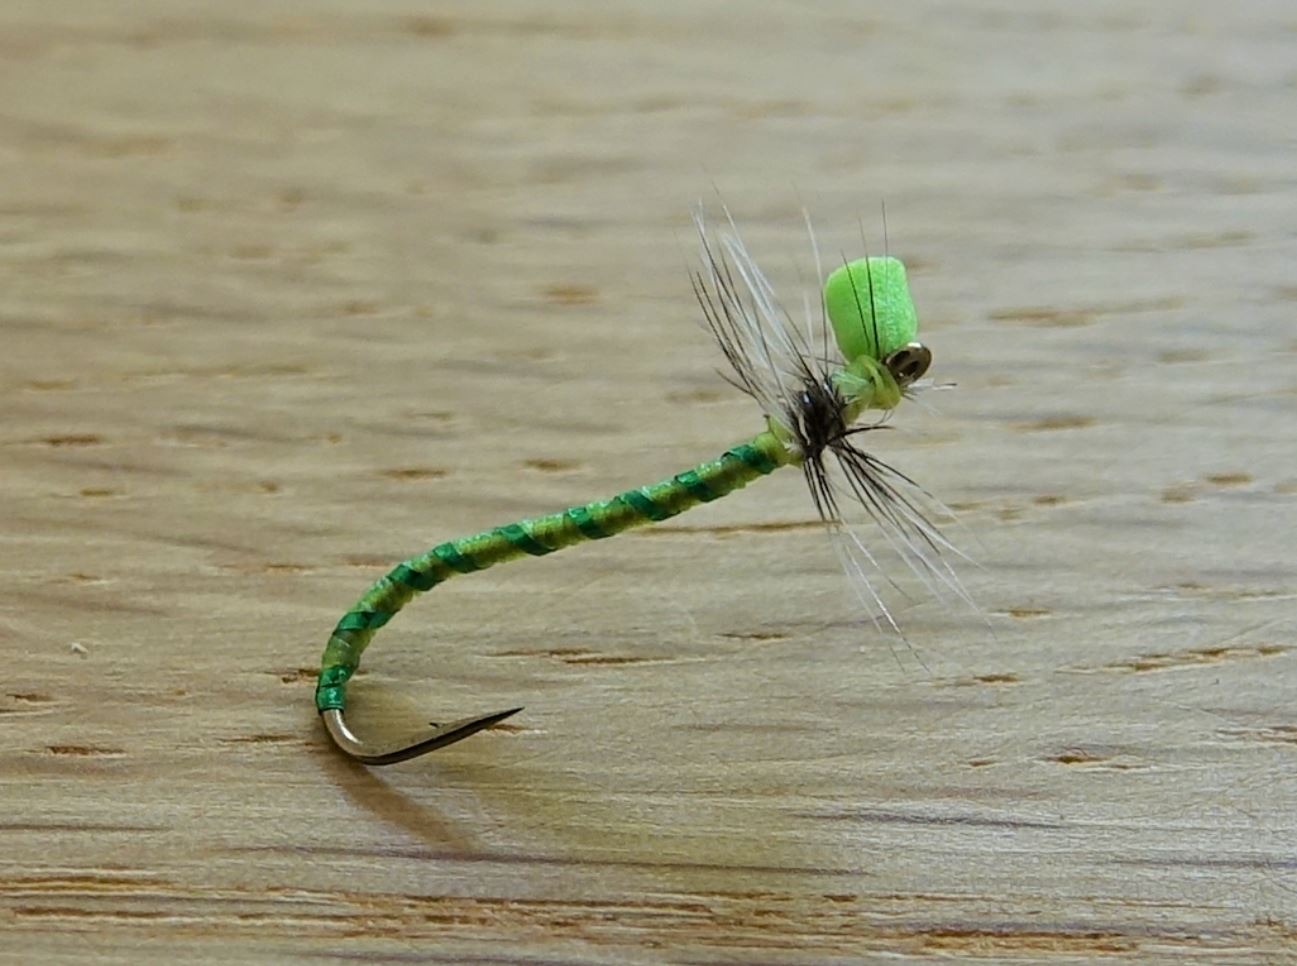 tordeuse chenille caterpillar dryfly mouche flytying eclosion